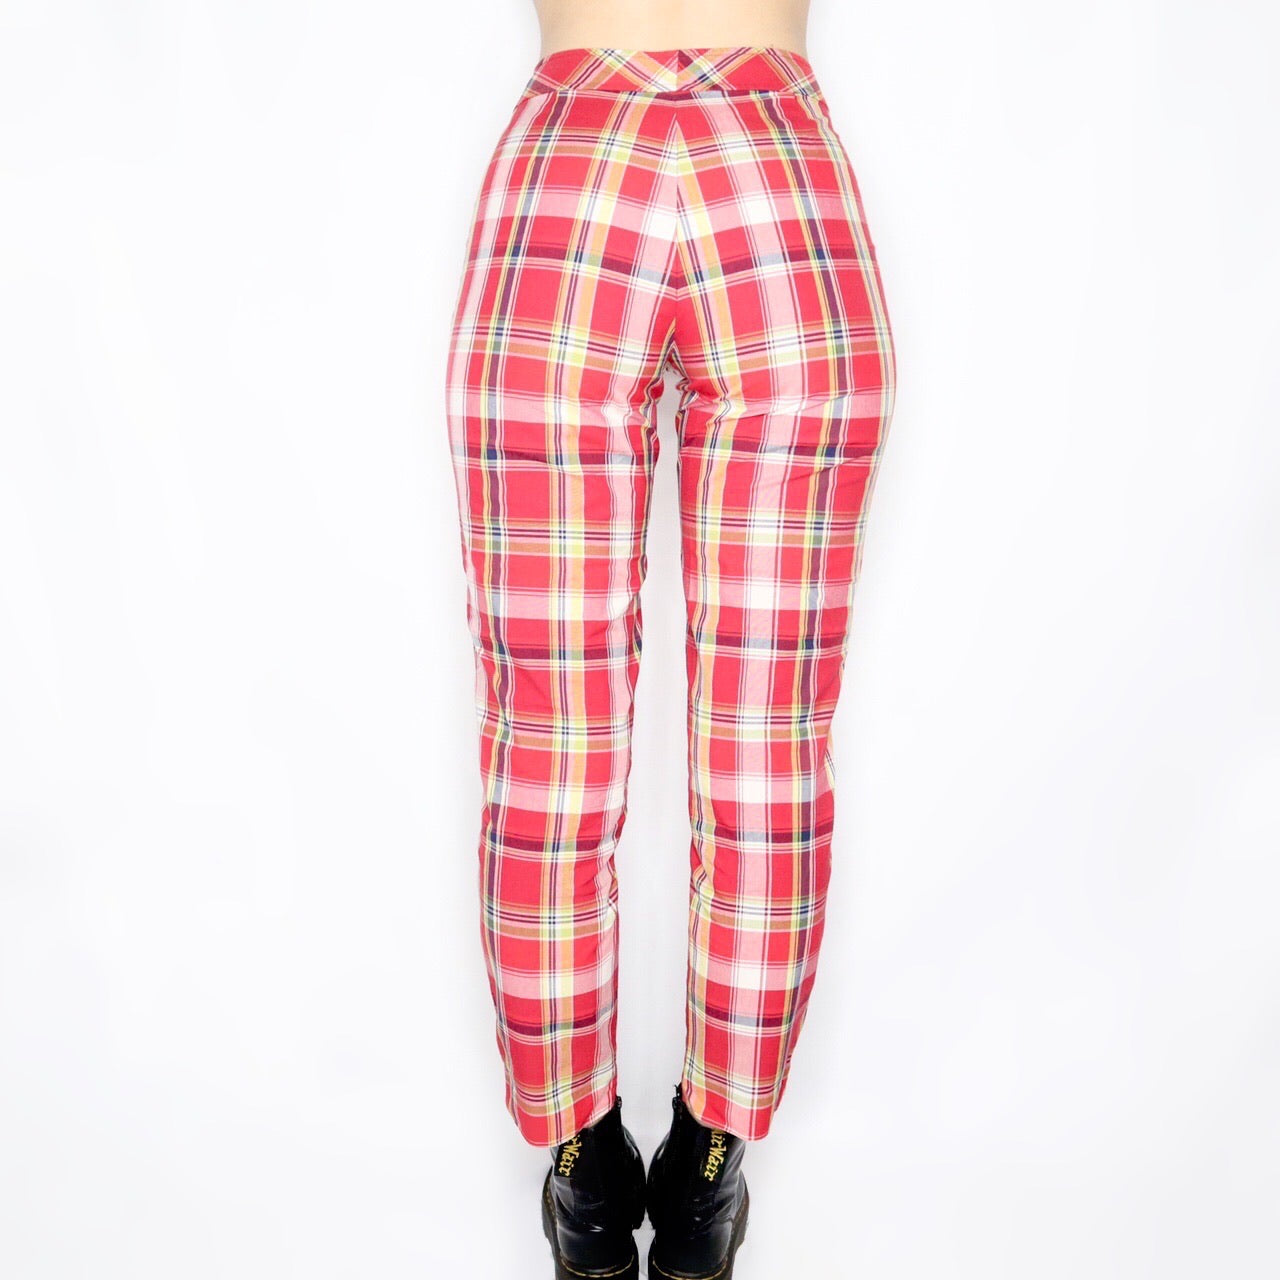 Vintage 90s Esprit Red Plaid High Waisted Pants